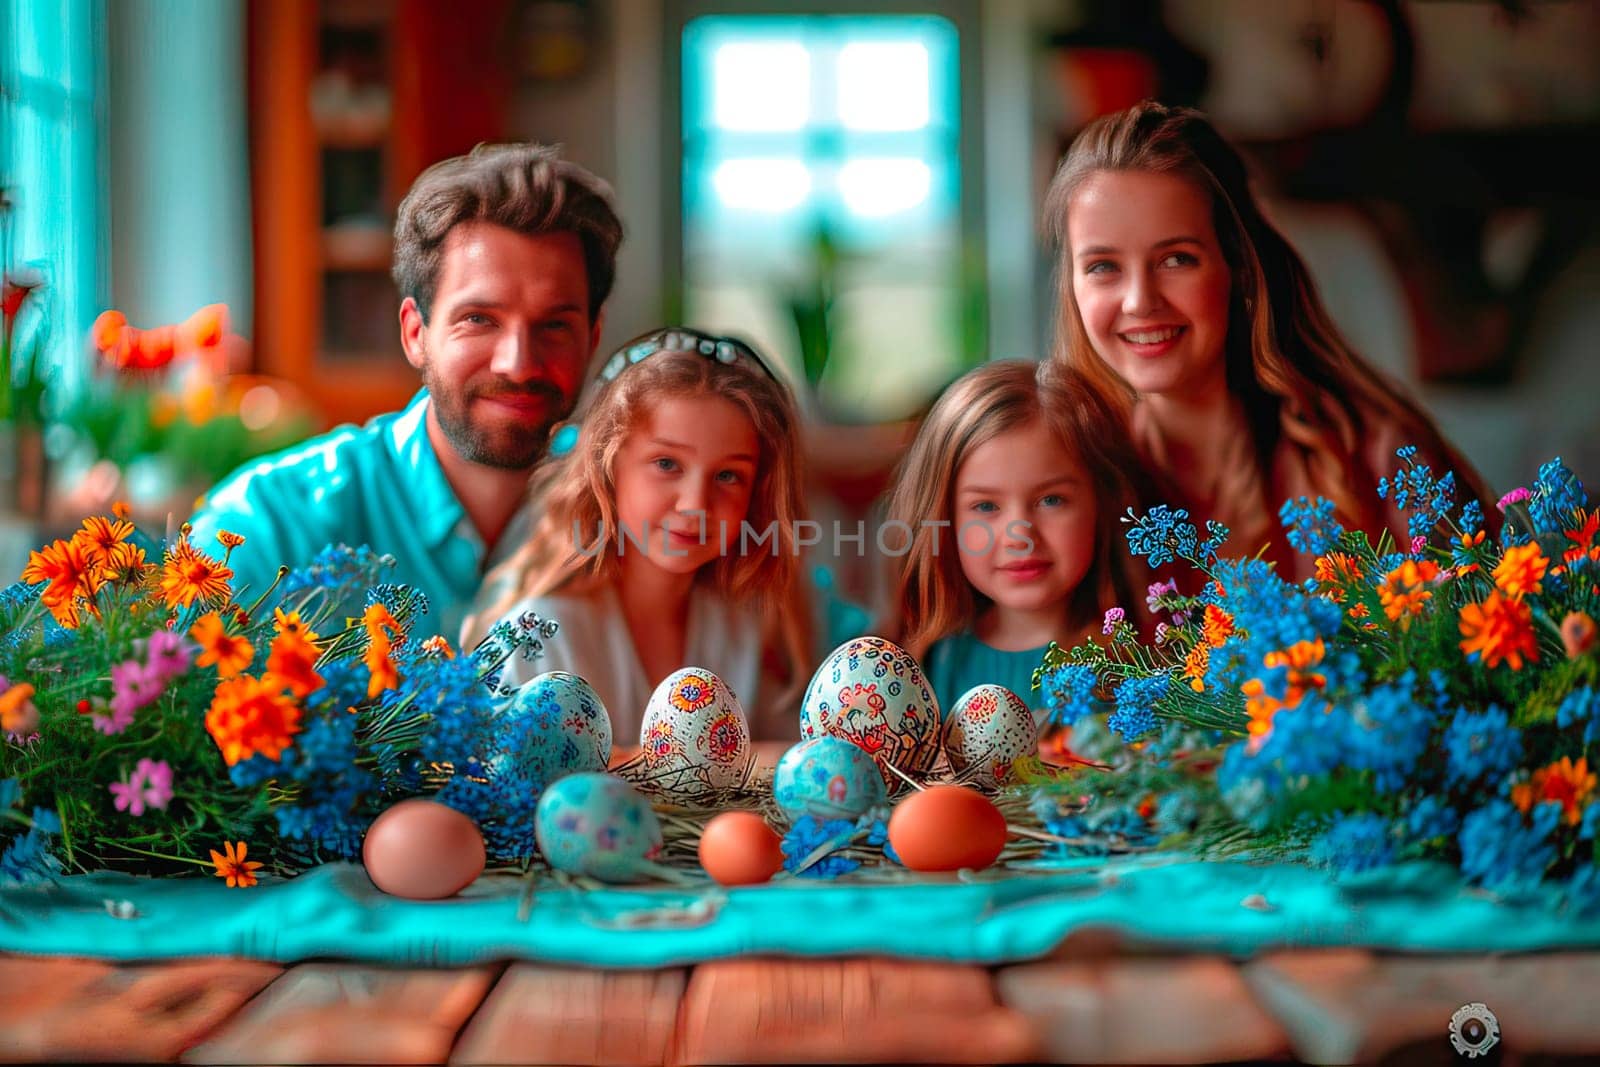 A large number of orange and blue flowers lie on the table. Between the flowers lie eggs and colourful Easter eggs in patterns, In the background you can see blurred figures of a woman, a man and two girls.